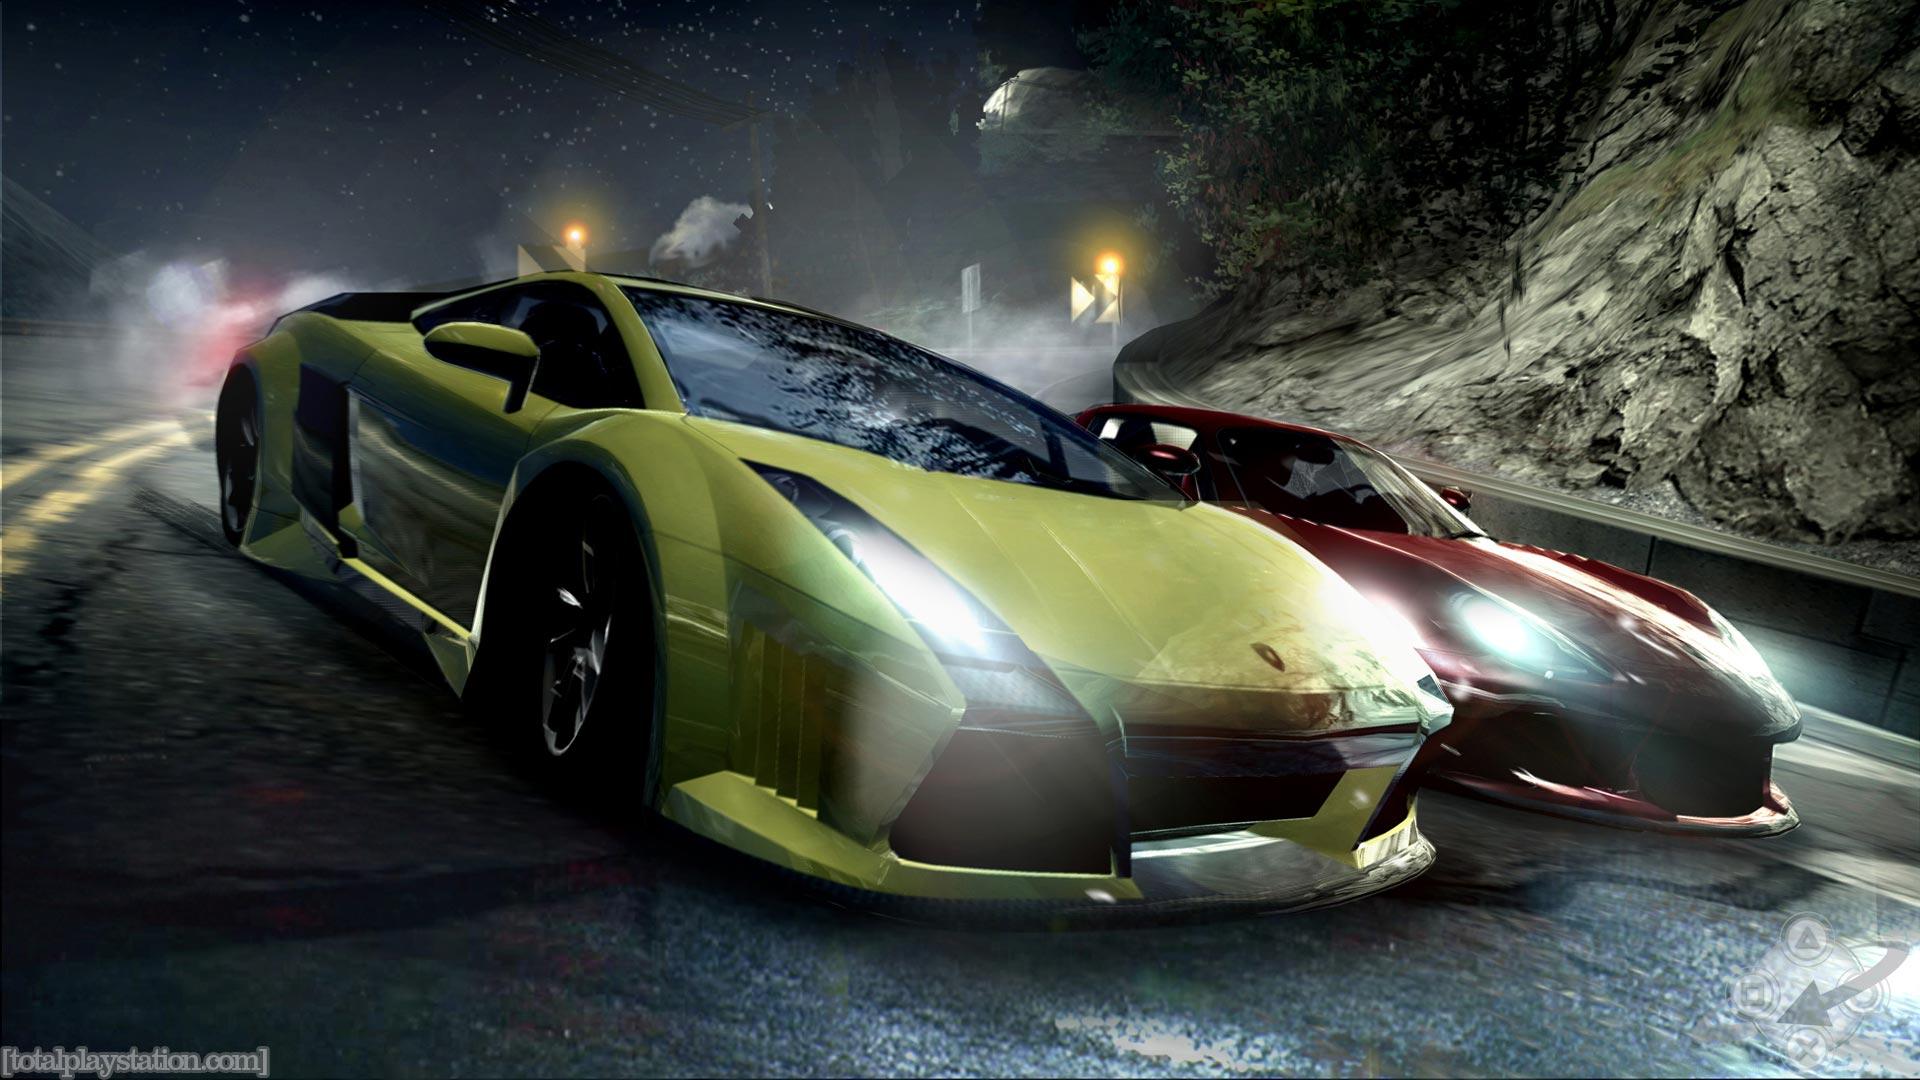 Need for Speed: Carbon HD Wallpaper 6 X 1080